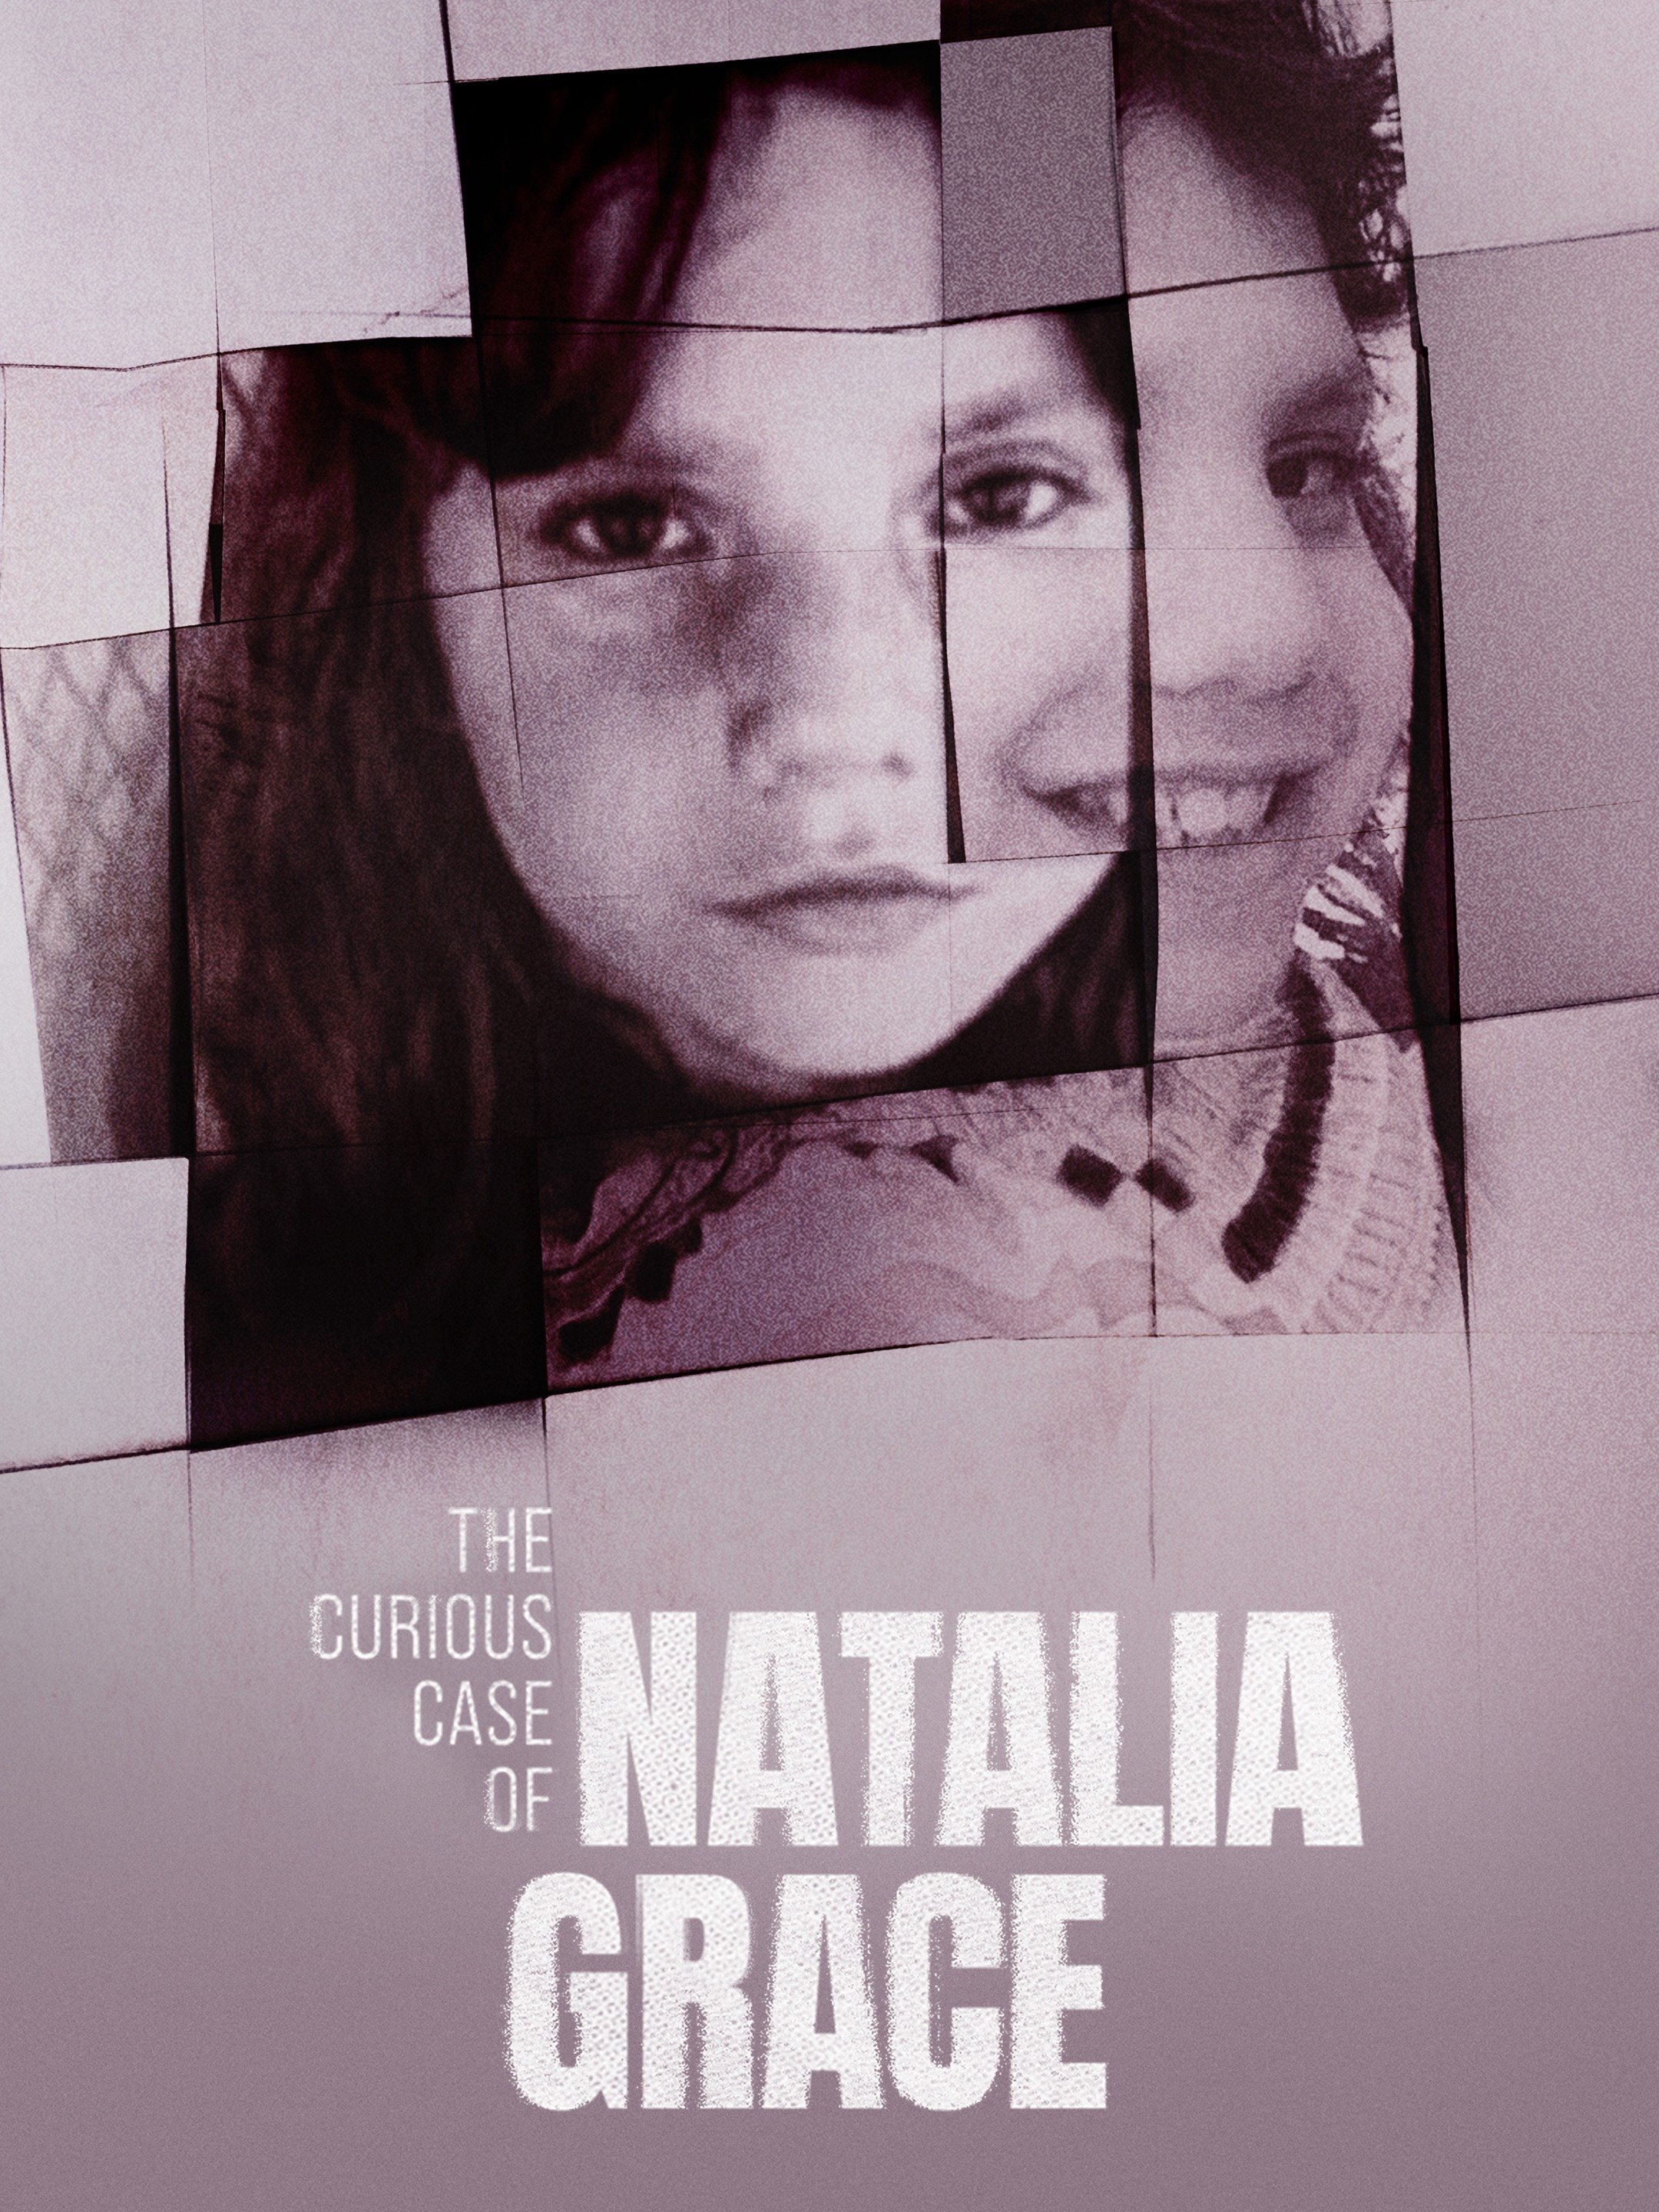 The Curious Case of Natalia Grace - Rotten Tomatoes